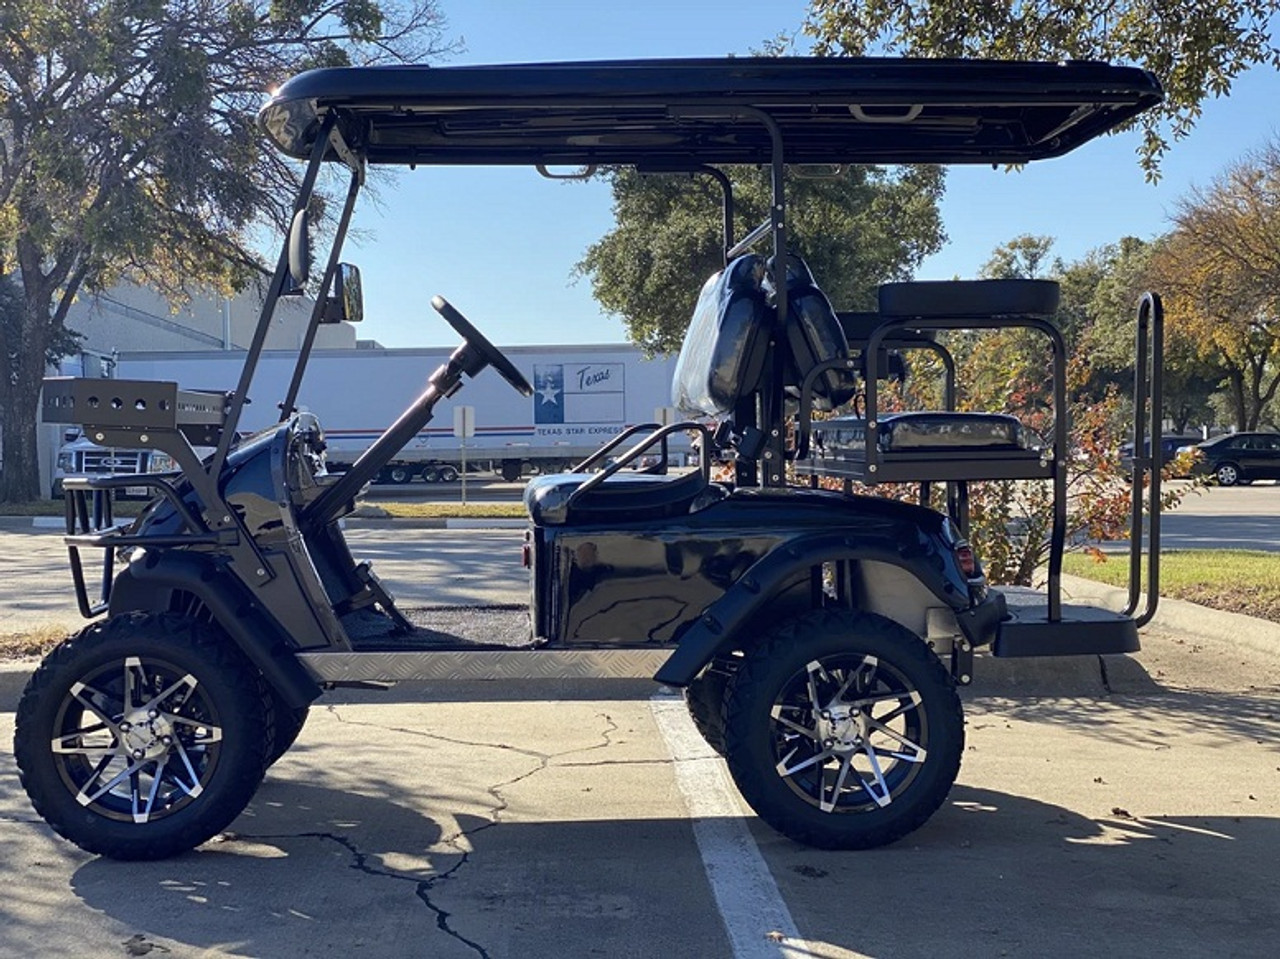 DYNAMIC ENFORCER GOLF CART BLACK - FULLY ASSEMBLED AND TESTED 4 SEATER (SIDE VIEW)